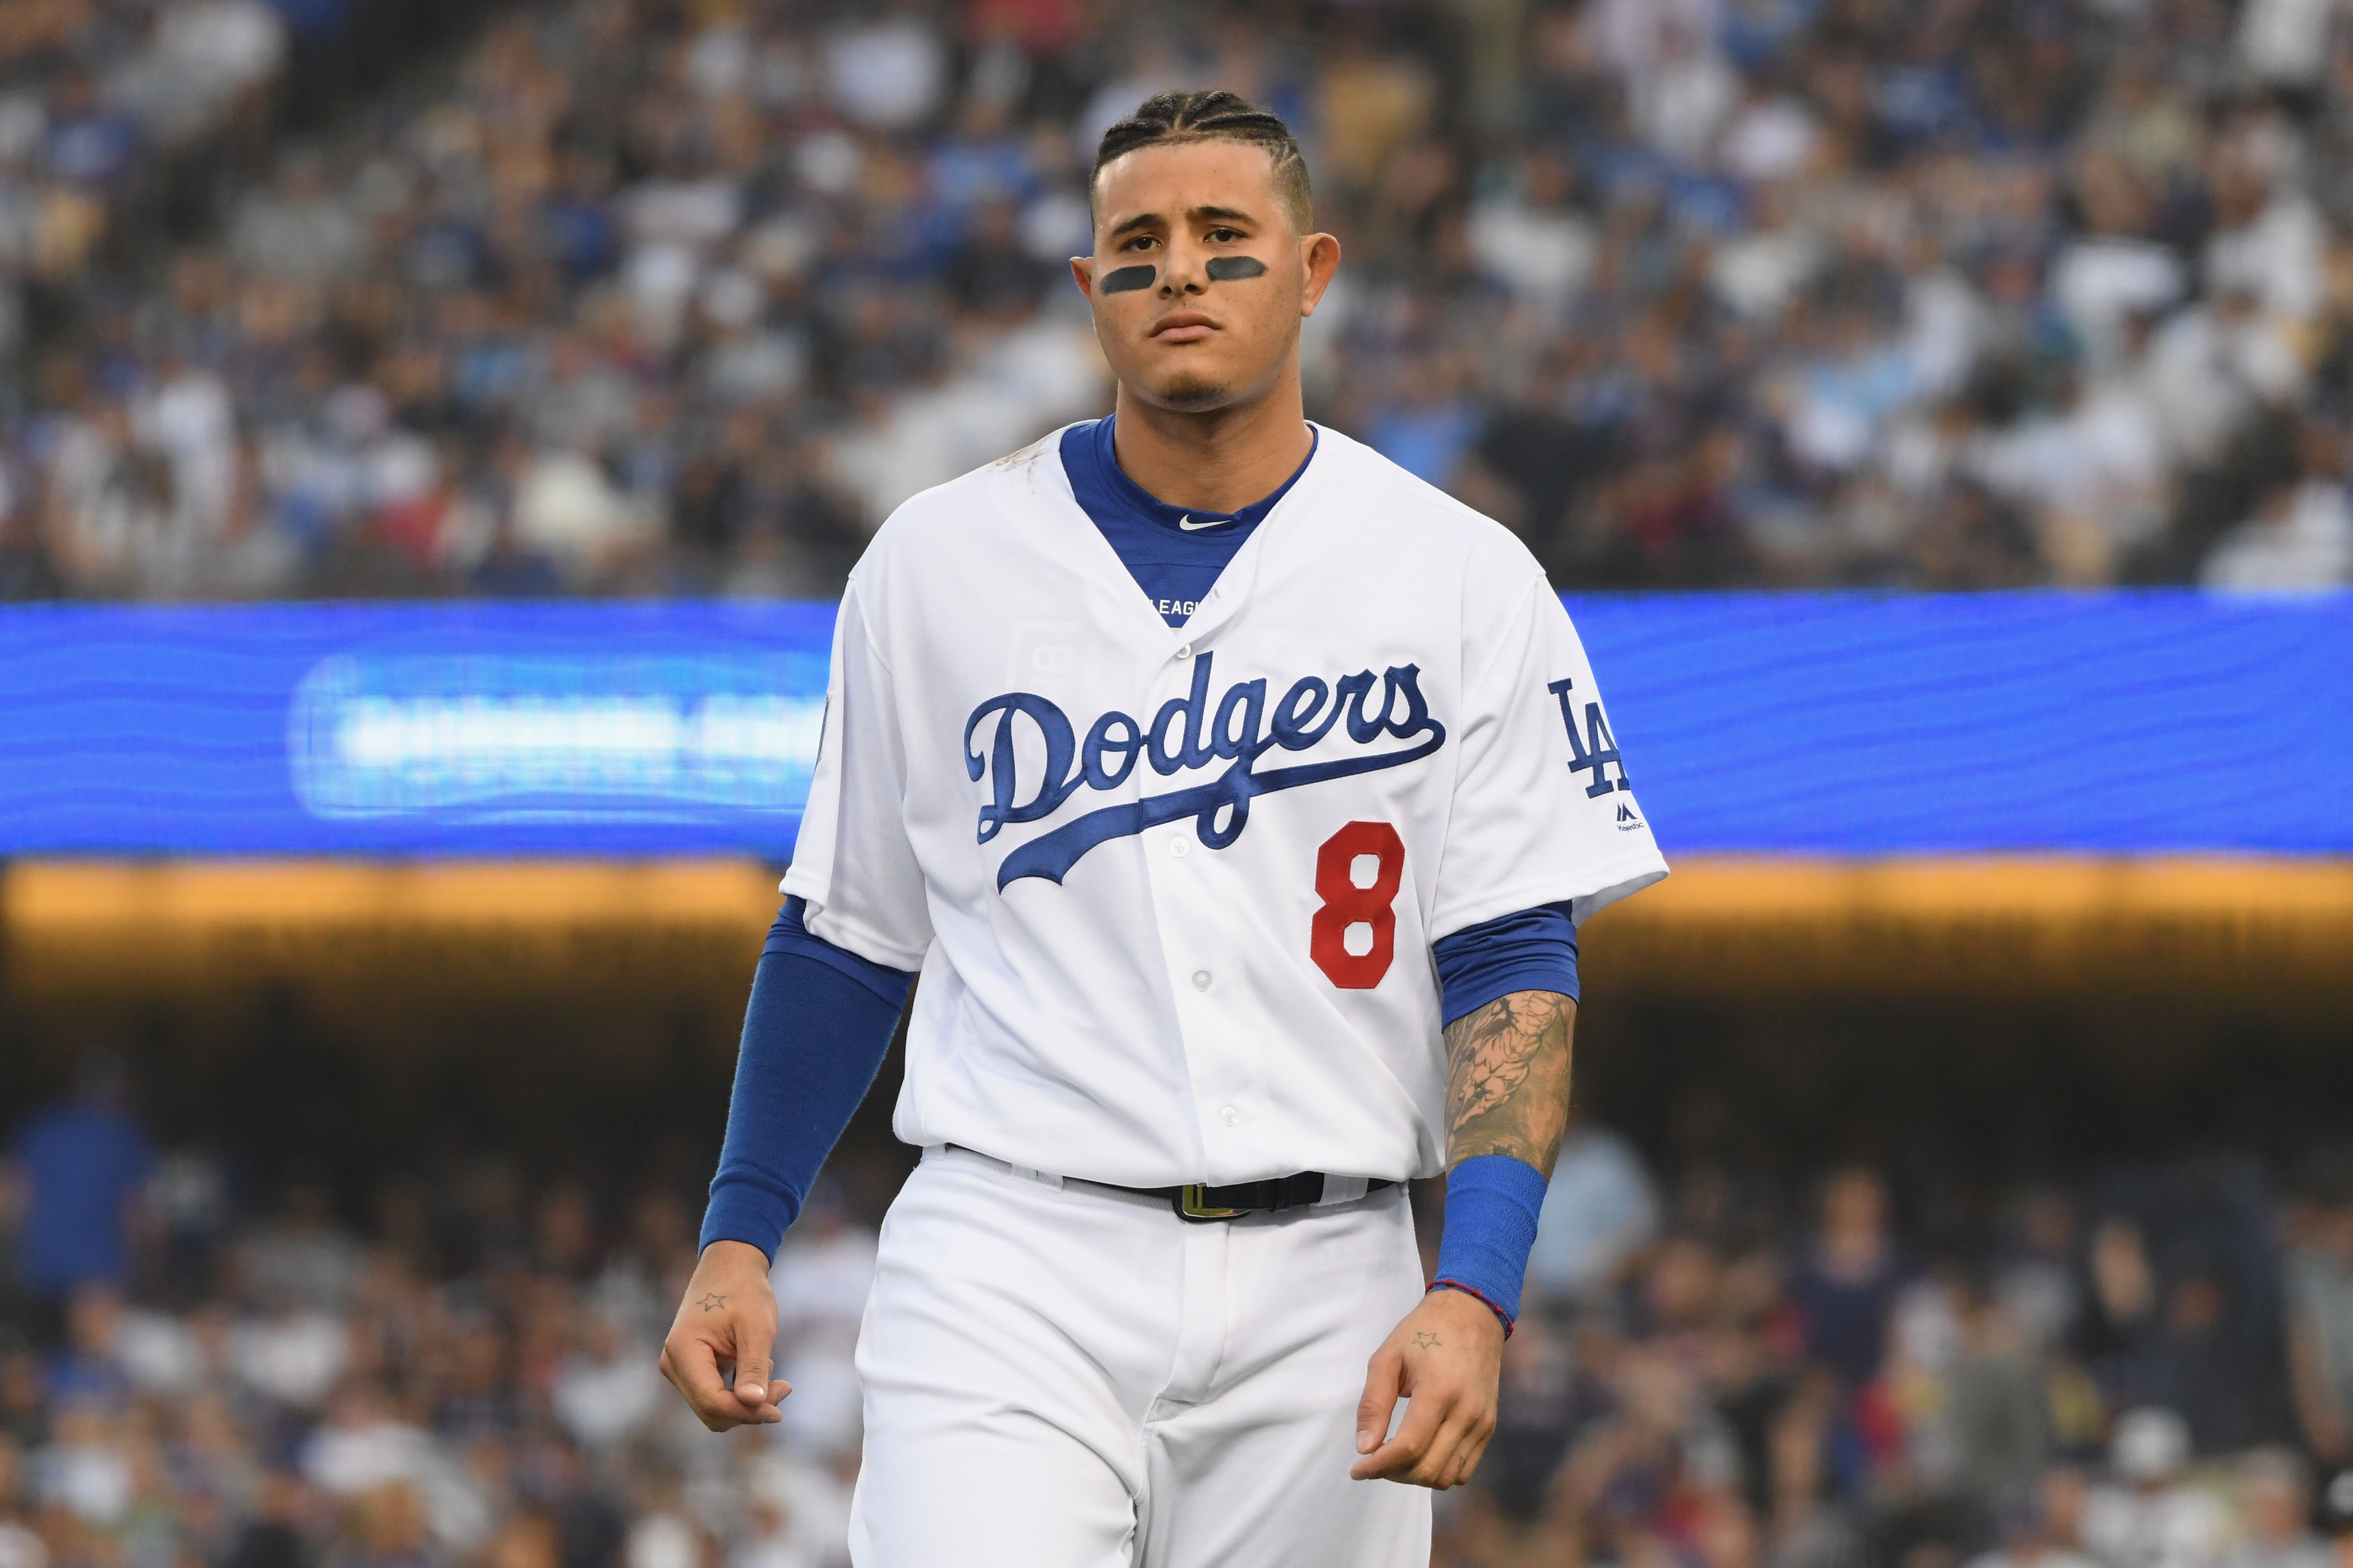 Not worried. Why? Because i'm f×#*ng Manny Machado. Now does